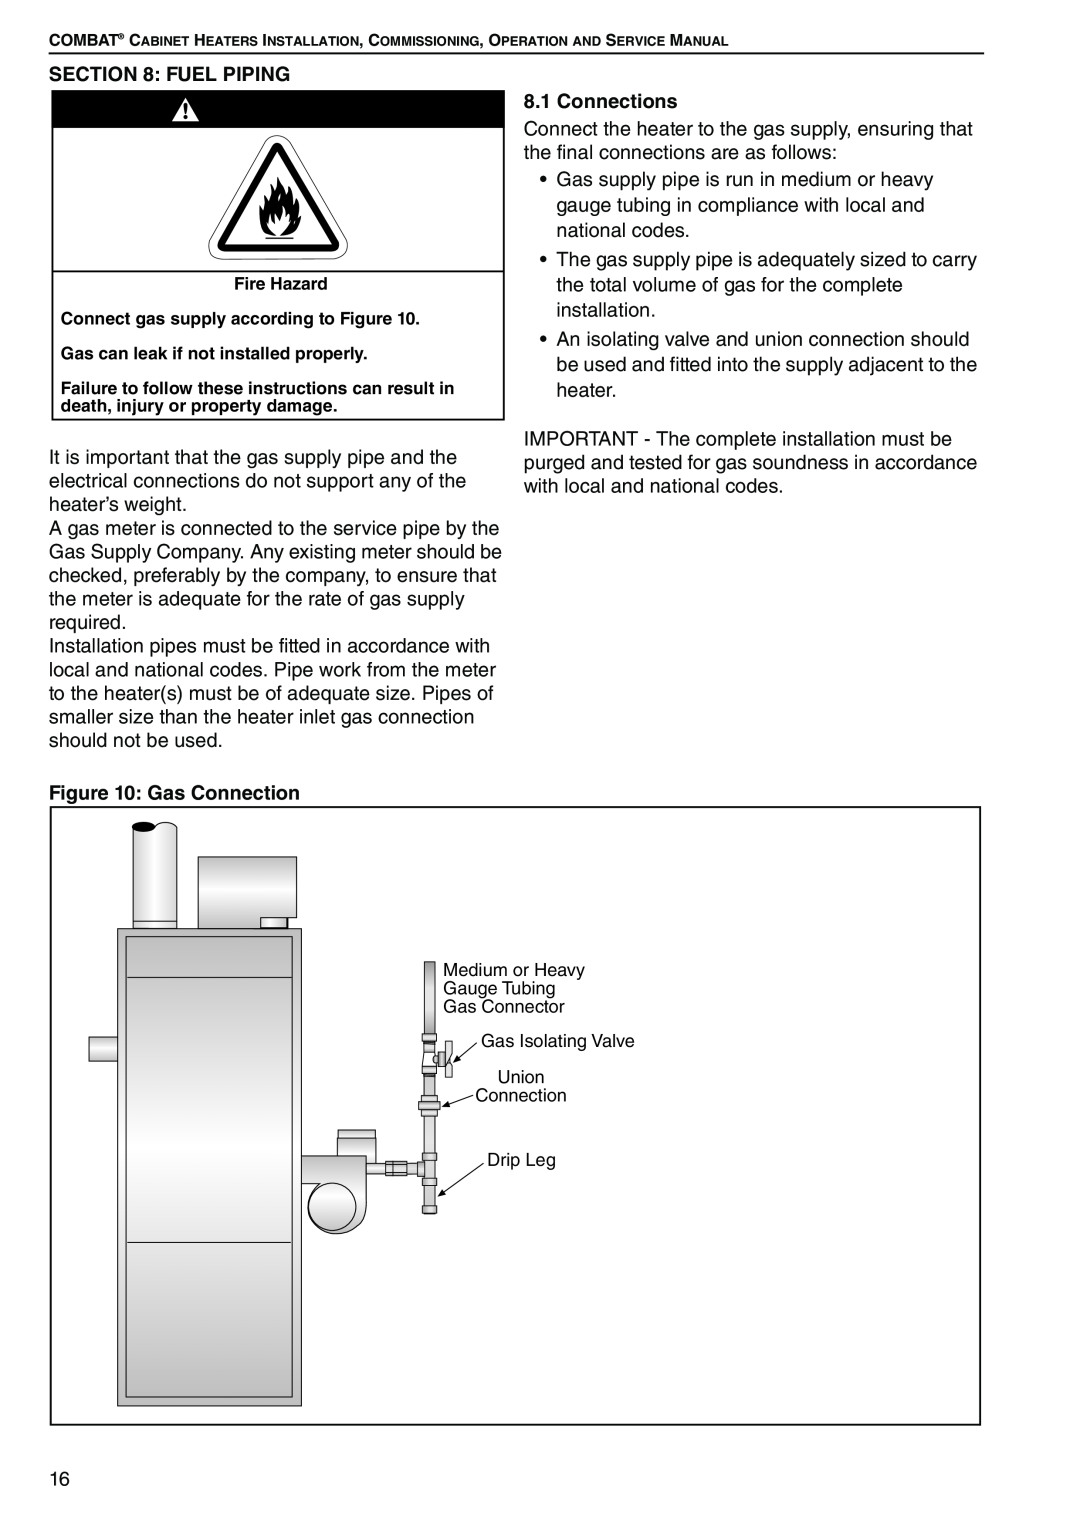 Roberts Gorden POP-ECA/PGP-ECA 015 to 0100 service manual Fuel Piping, Gas Connection, Connections 